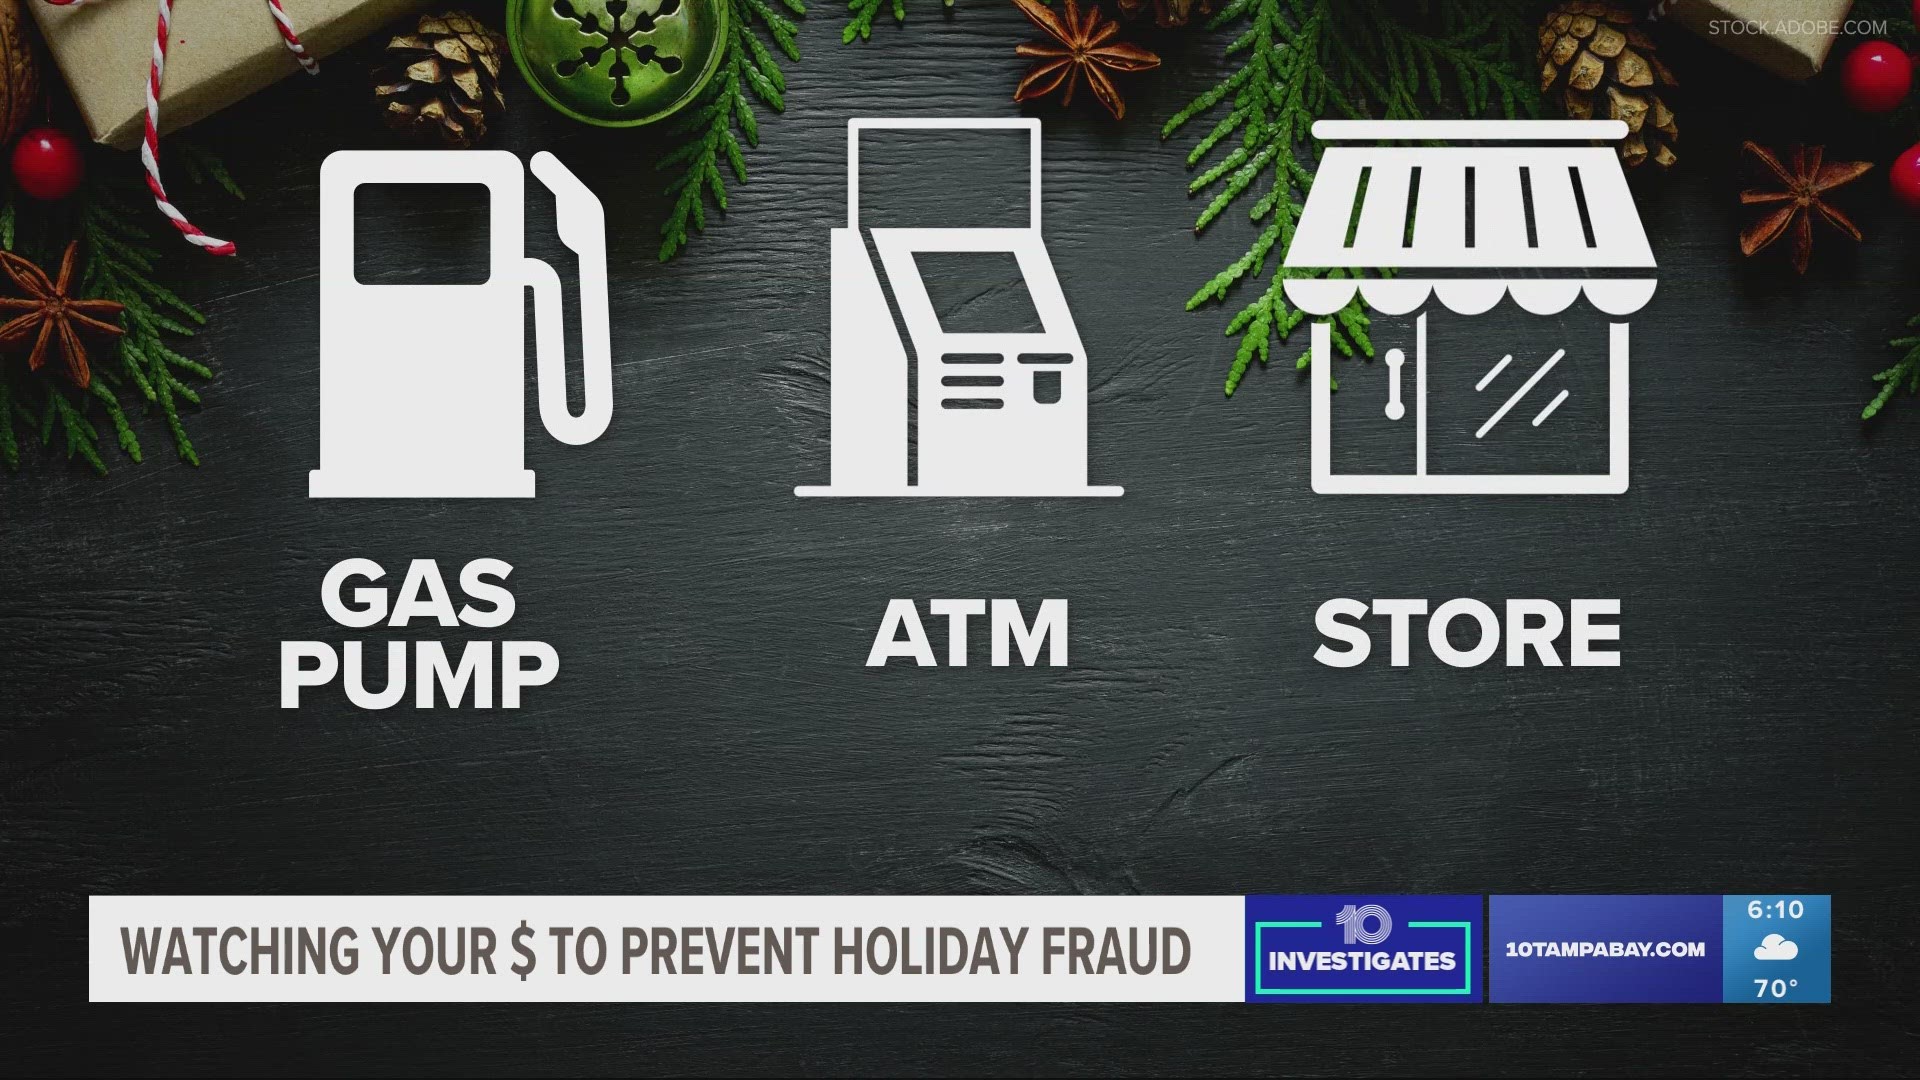 The head of fraud services at Visa tells us what to look out for at the gas pump, the ATM, and the checkout.